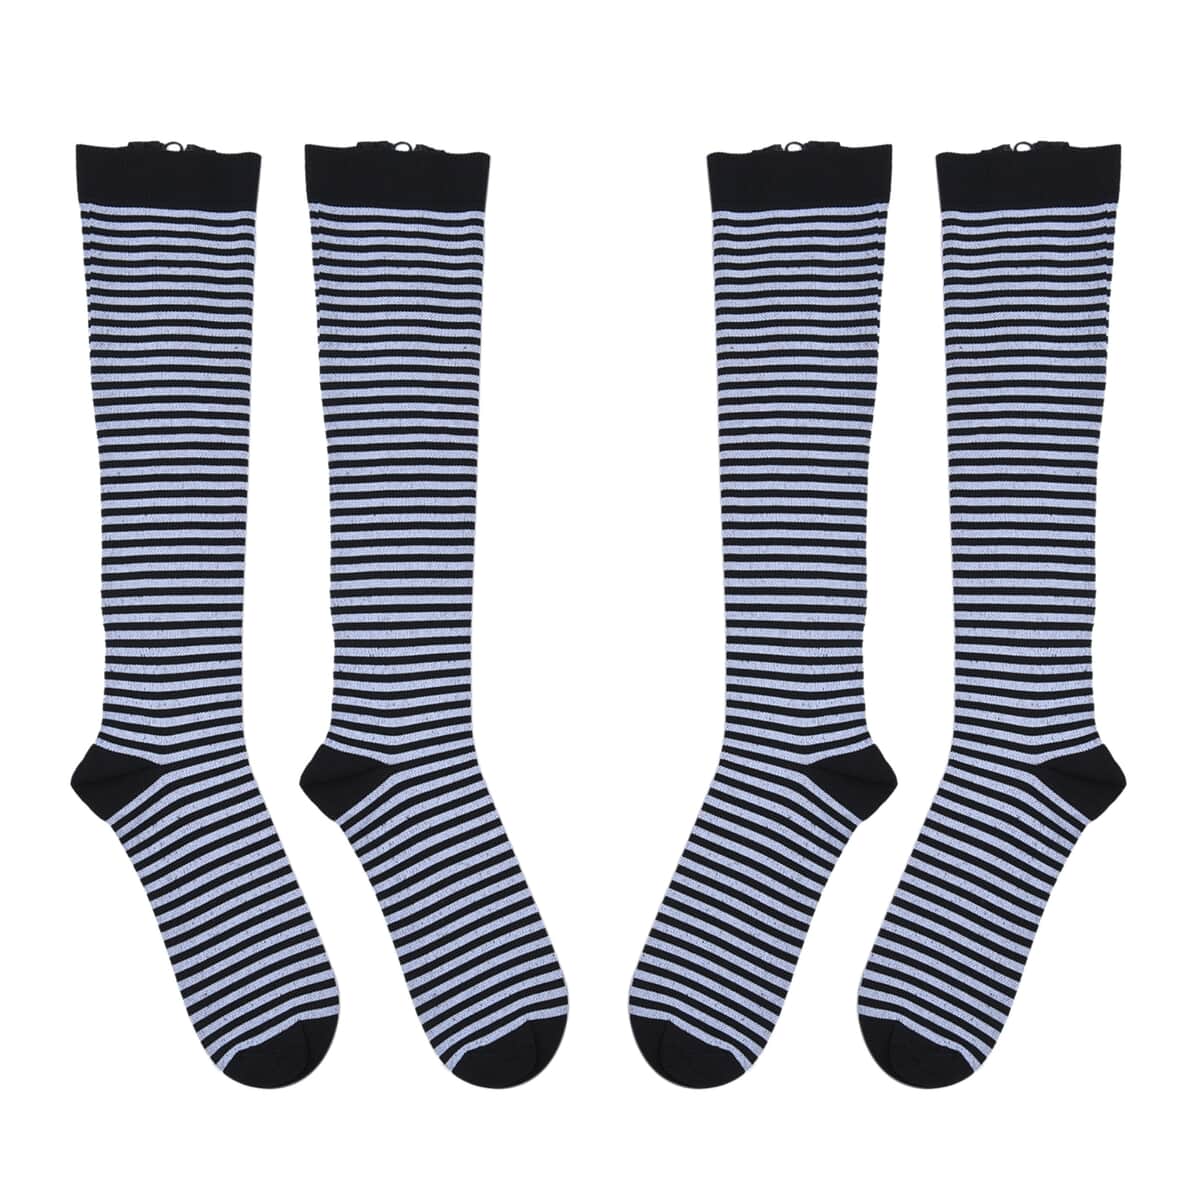 Set of 2 Black and White Spandex & Nylon 15-20mmHg Compression Socks with Zipper - XXL image number 0